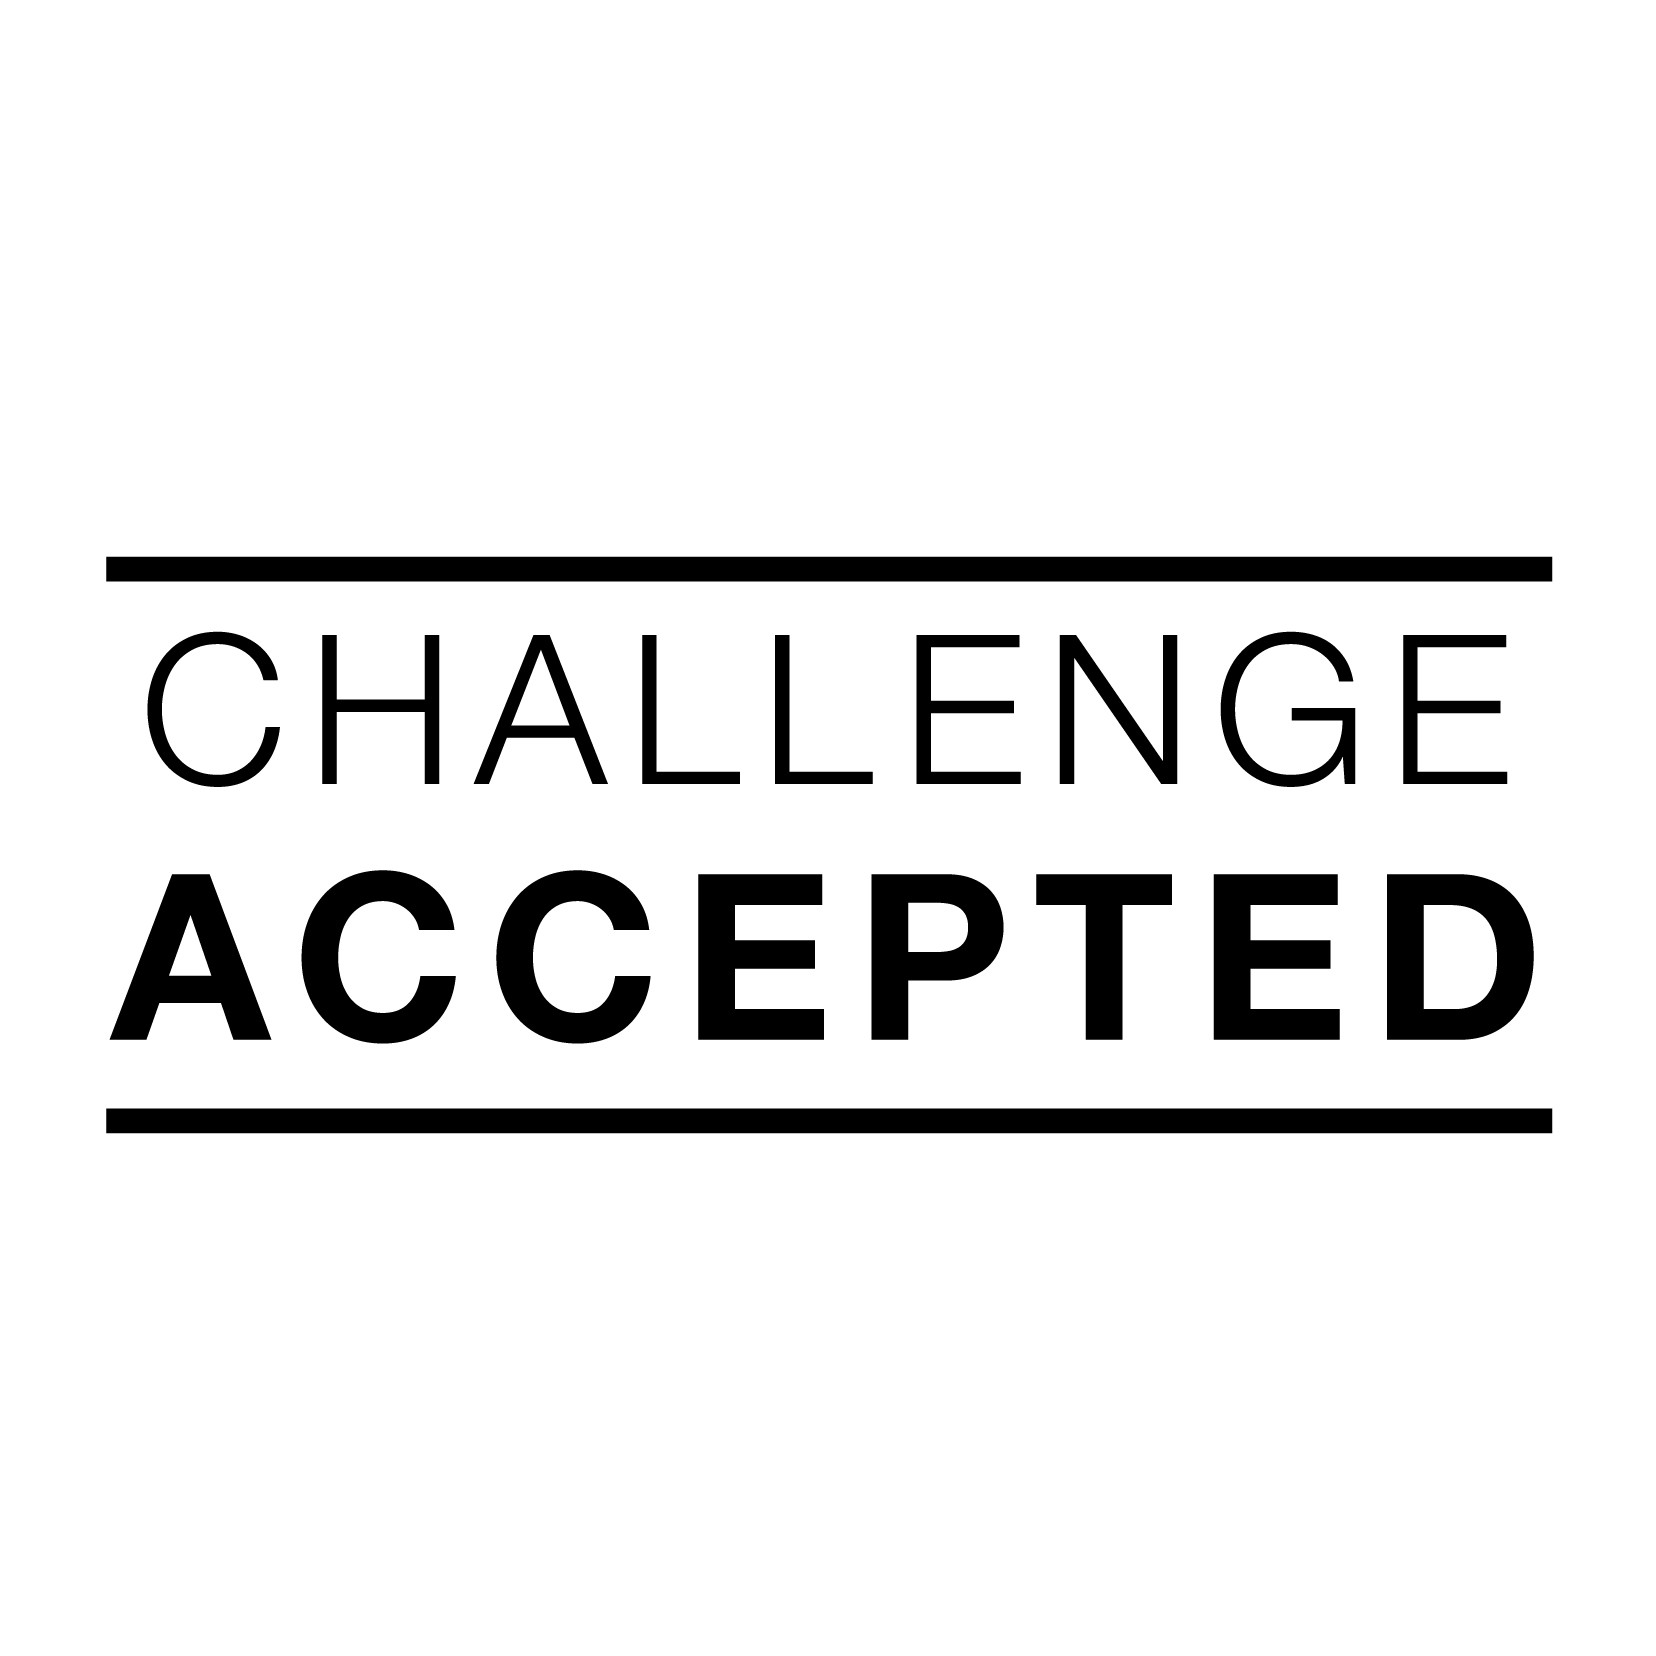 Challenge Accepted Quotes. QuotesGram